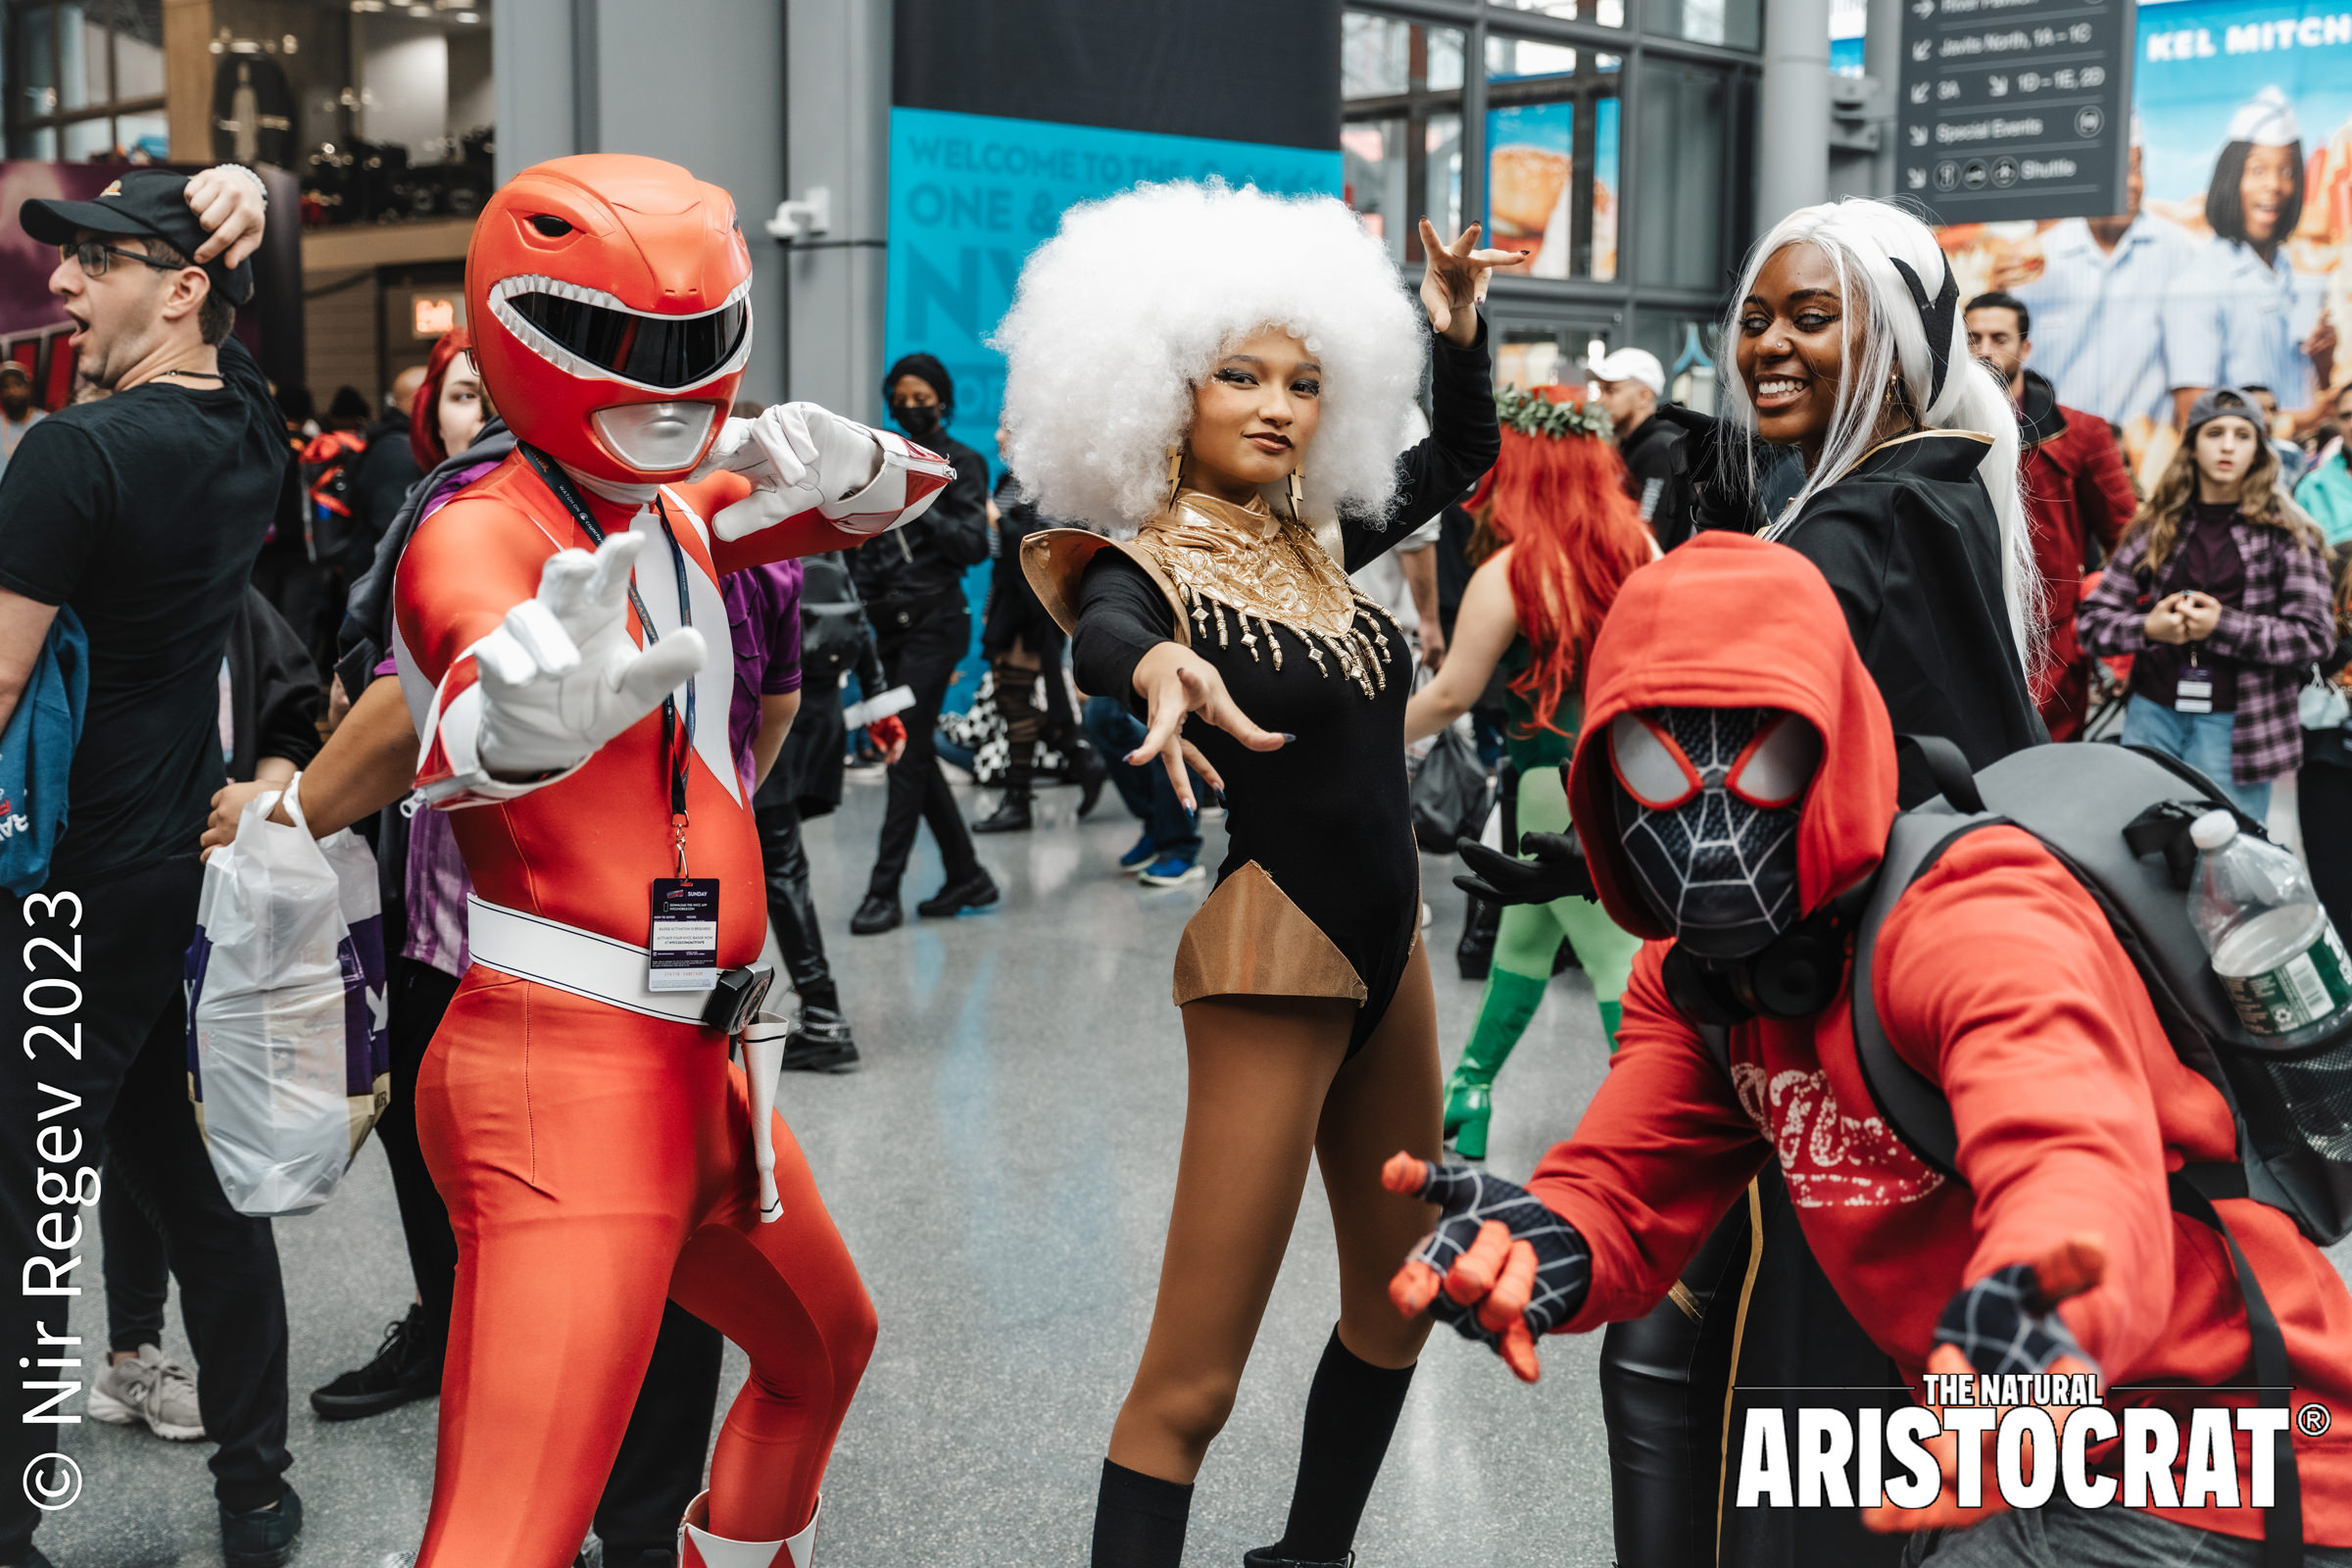 NYCC Power Rangers, X0Men, and Spiderman cosplayers at New York Comic Con 2023. Photo Credit: © Nir Regev 2023 - The Natural Aristocrat®